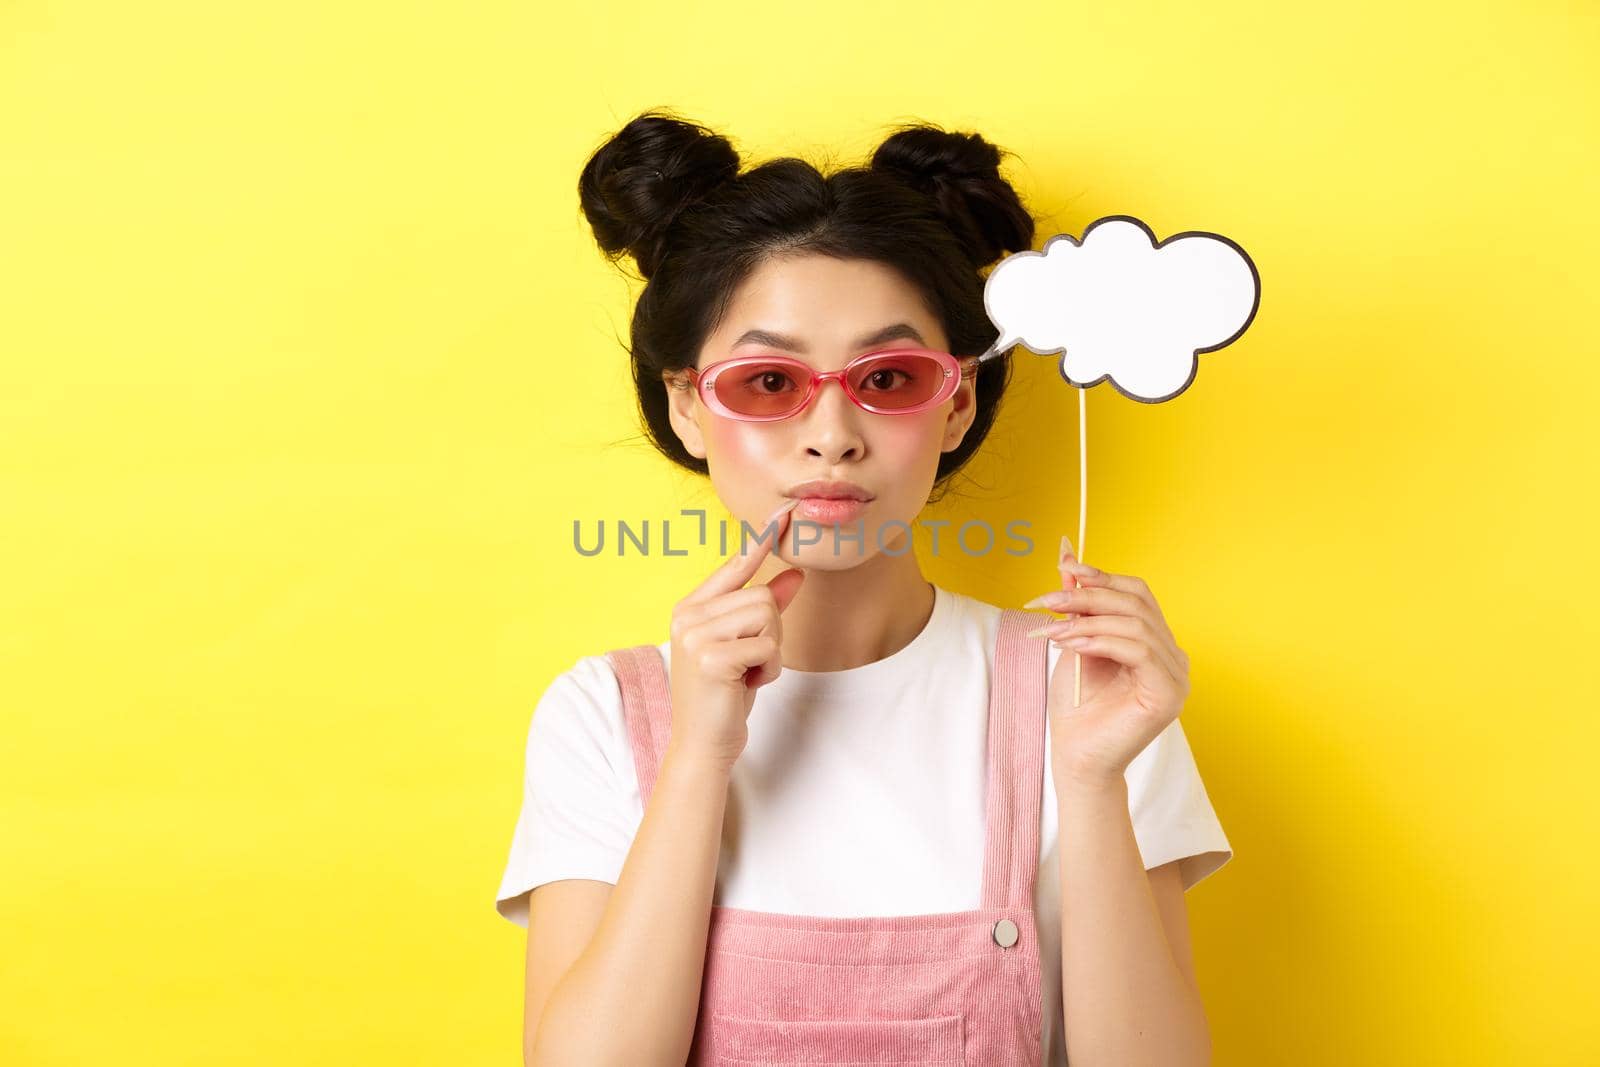 Summer and fashion concept. Stylish asian girl in sunglasses holding comment cloud on stick and looking thoughtful, thinking or saying something, standing on yellow background.